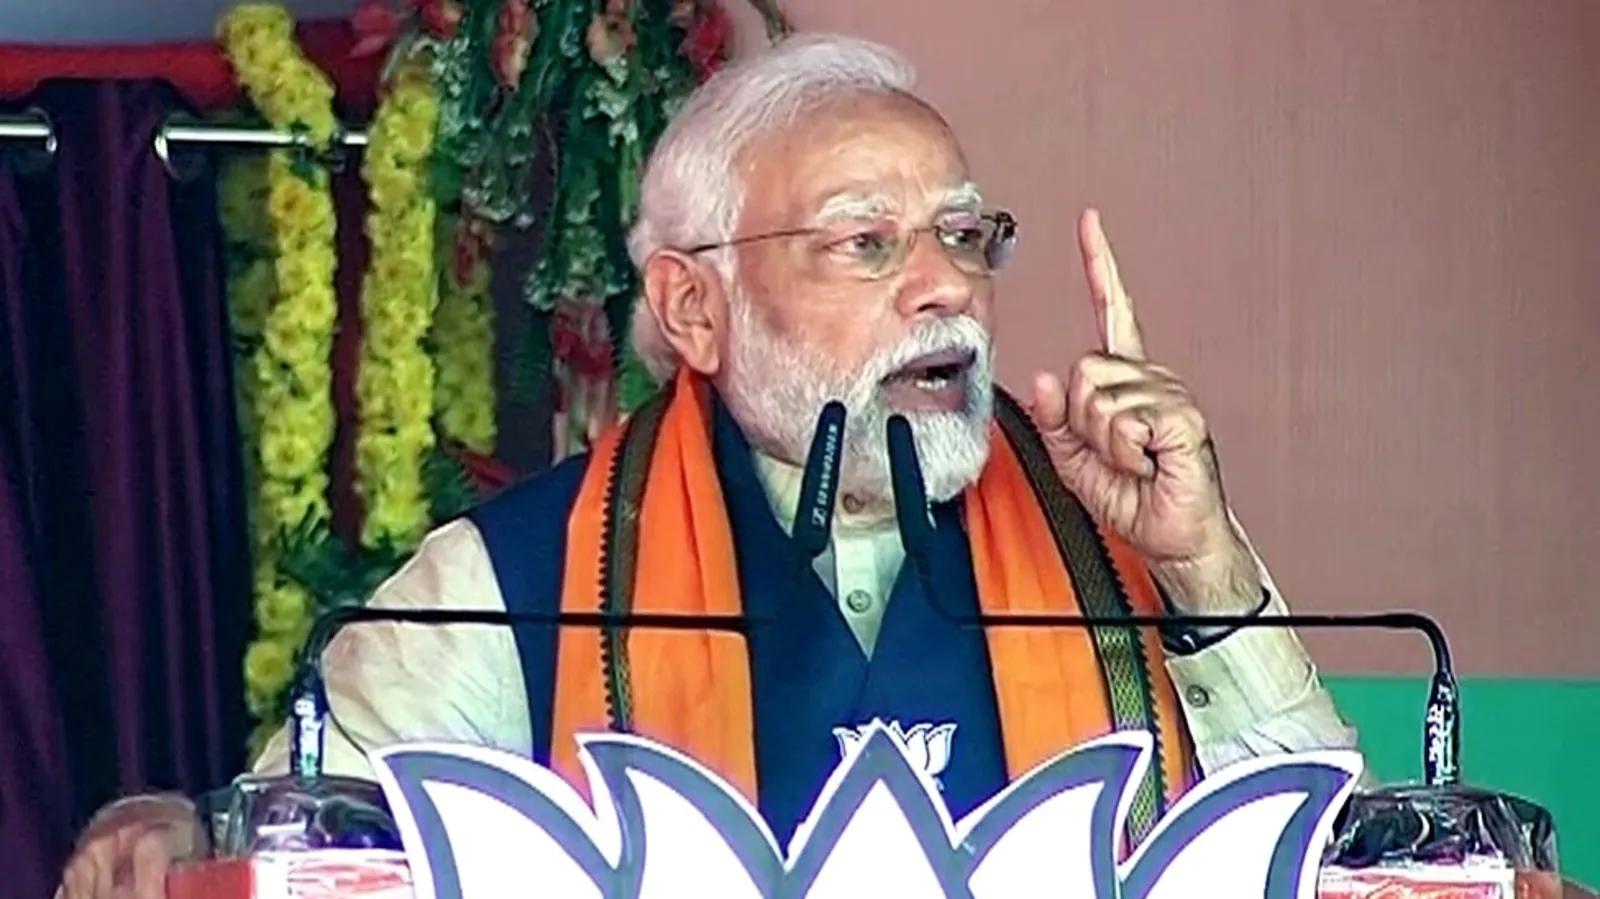 Evening brief: At Varanasi rally, PM Modi slams opposition for blind attacks and all the latest news